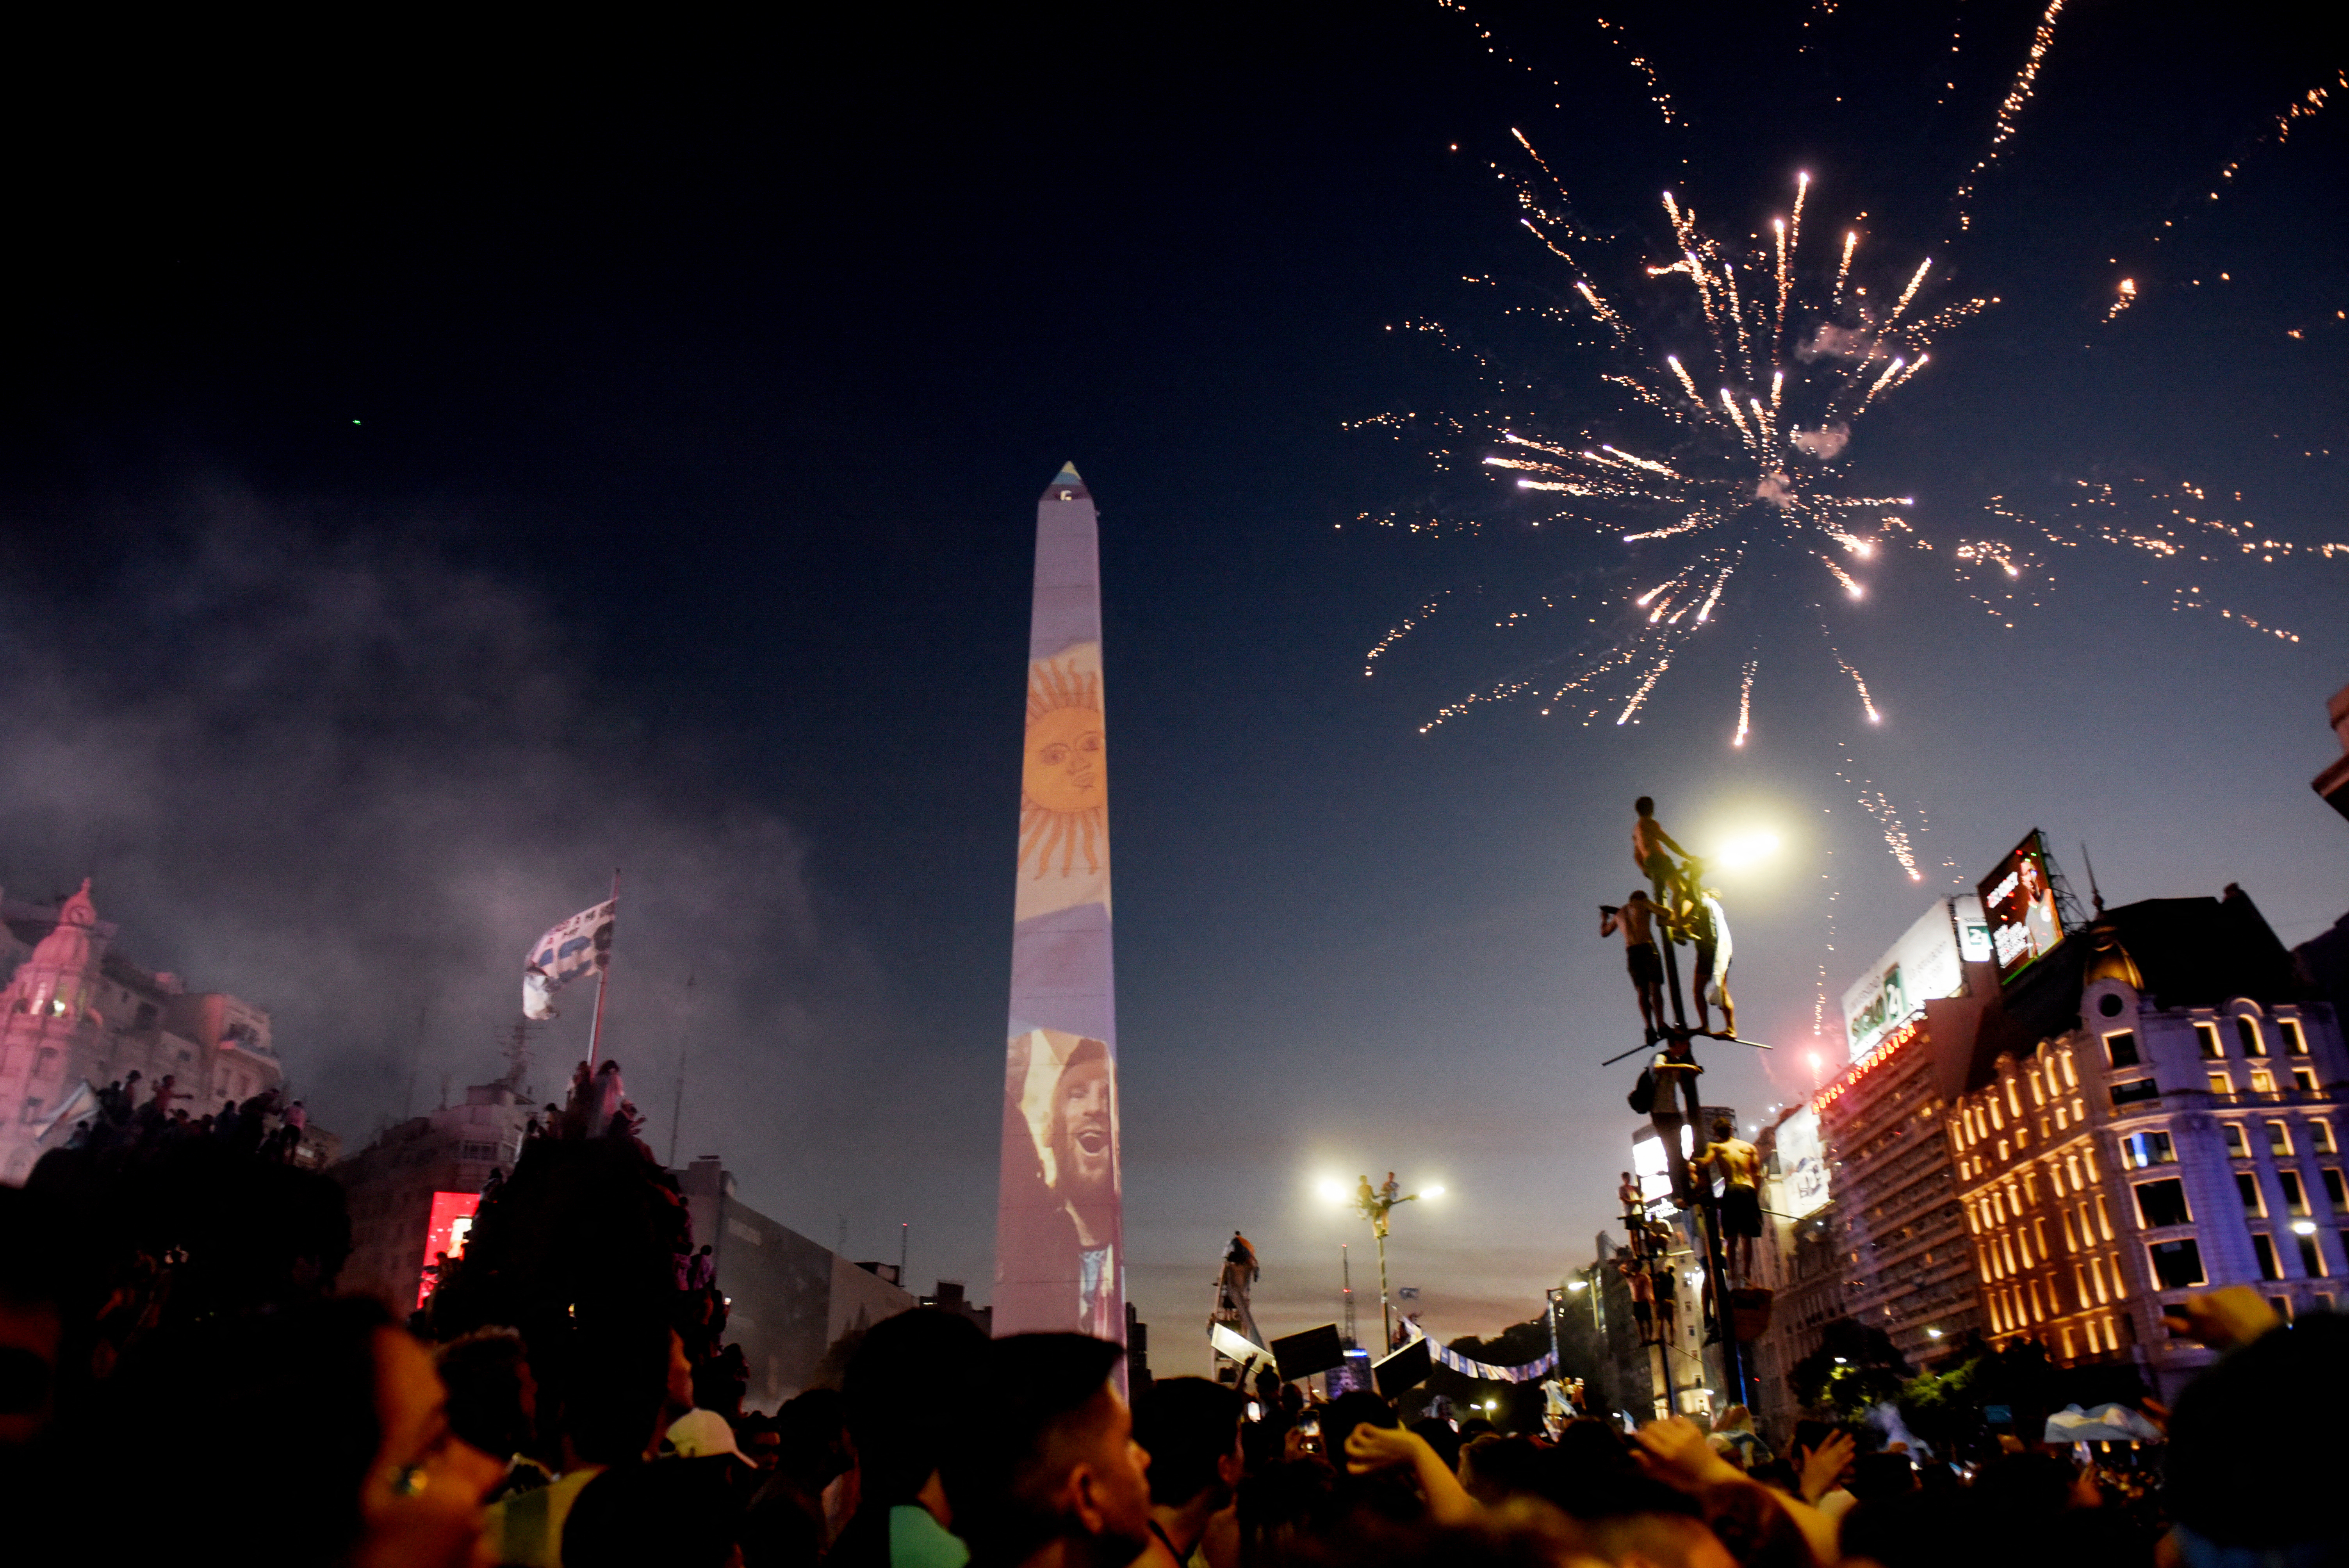 Soccer Football - FIFA World Cup Final Qatar 2022 - Fans in Buenos Aires - Buenos Aires, Argentina - December 18, 2022  Argentina fans celebrate winning the World Cup at the Obelisk with an image of Lionel Messi and fireworks REUTERS/Mariana Nedelcu